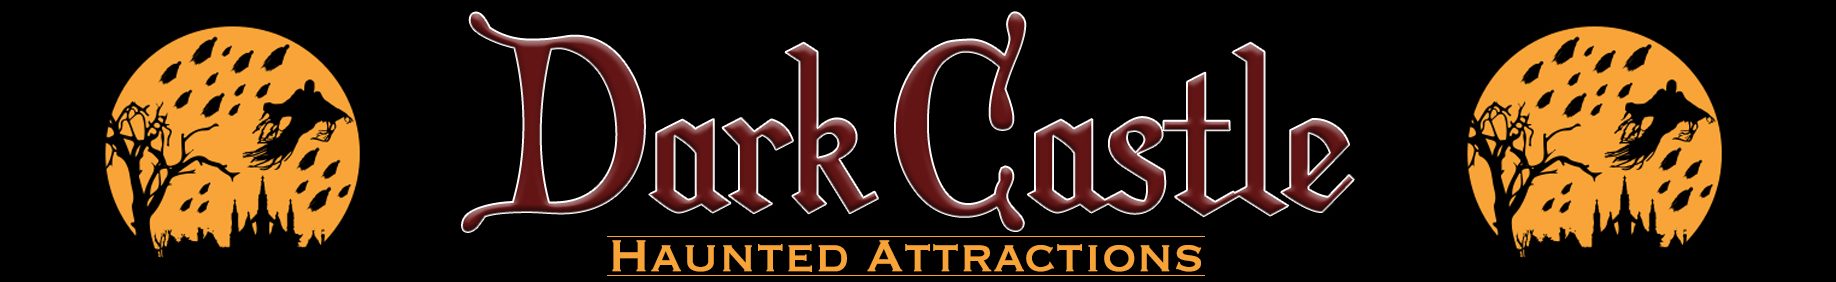 Dark Castle Haunted Attractions offers year-round events and attractions. During Halloween, we offer an indoor haunt, an outdoor trail and a zombie zone. 3 haunts for 1 ticket.